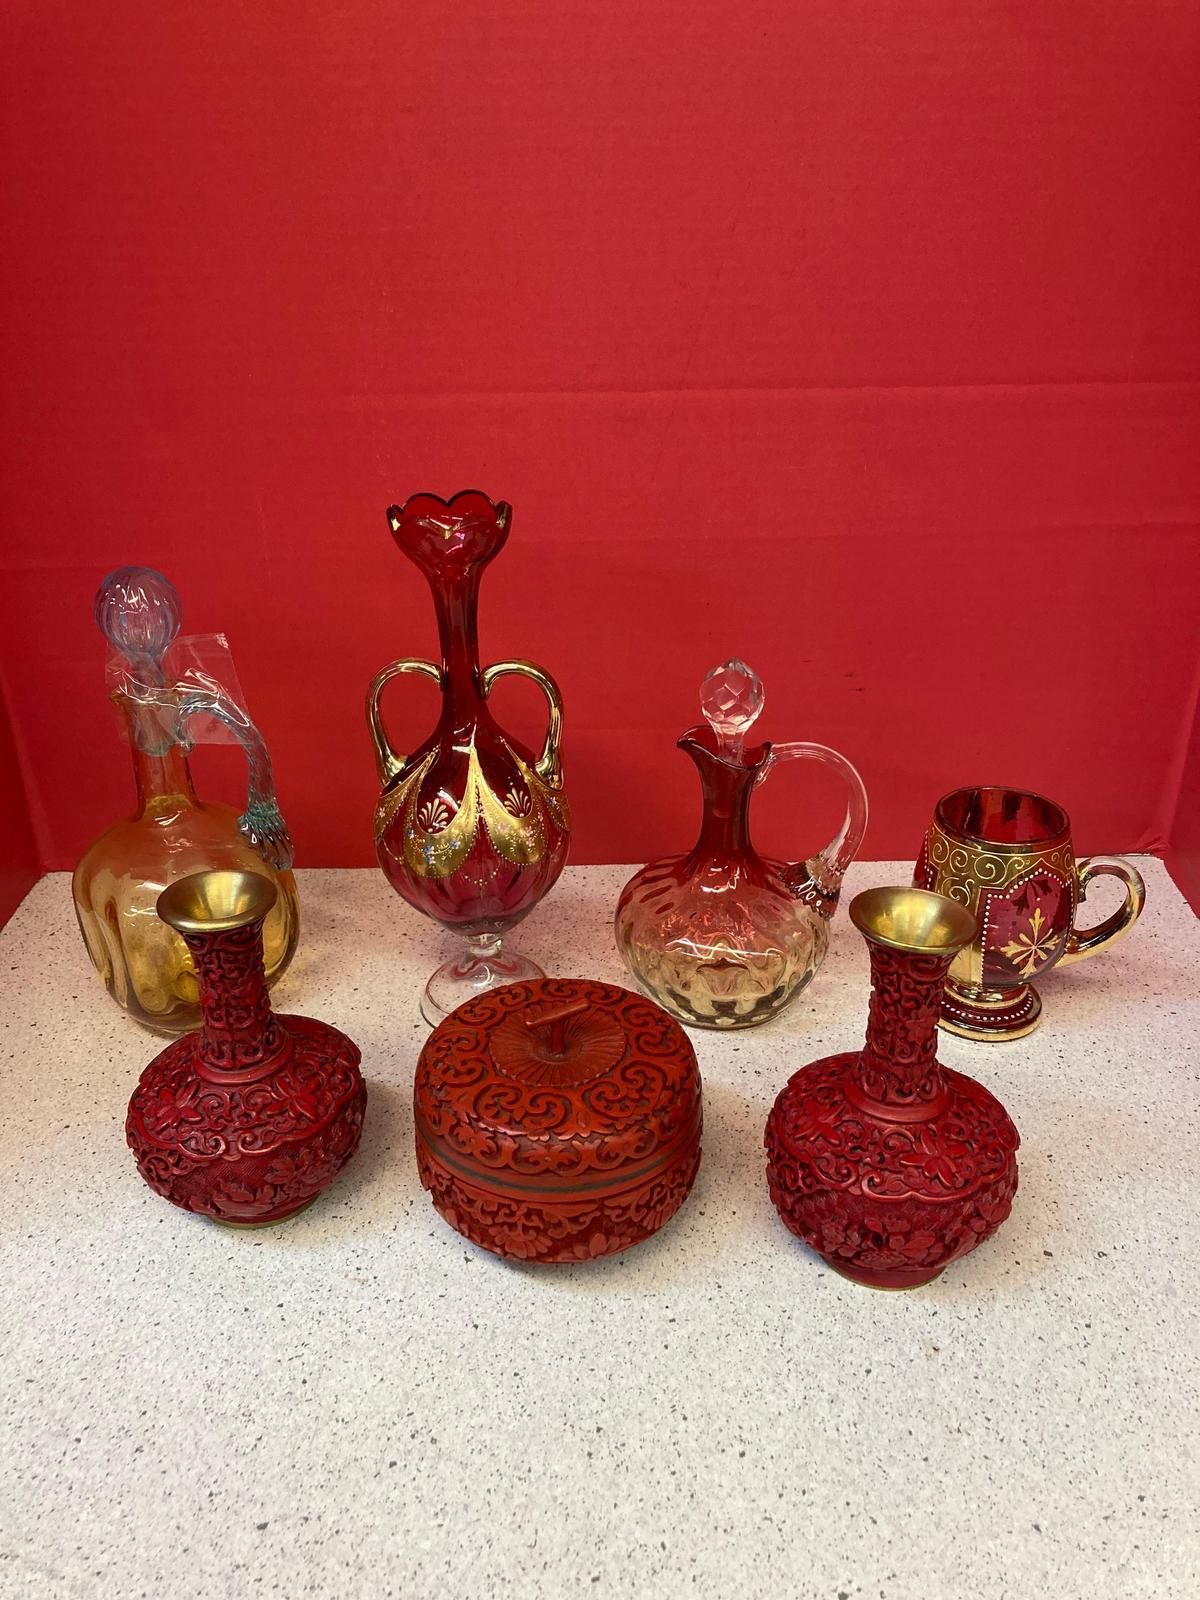 Chinese red, lacquer Cinnabar set Moser, cranberry vase and mug 2 glass decanters